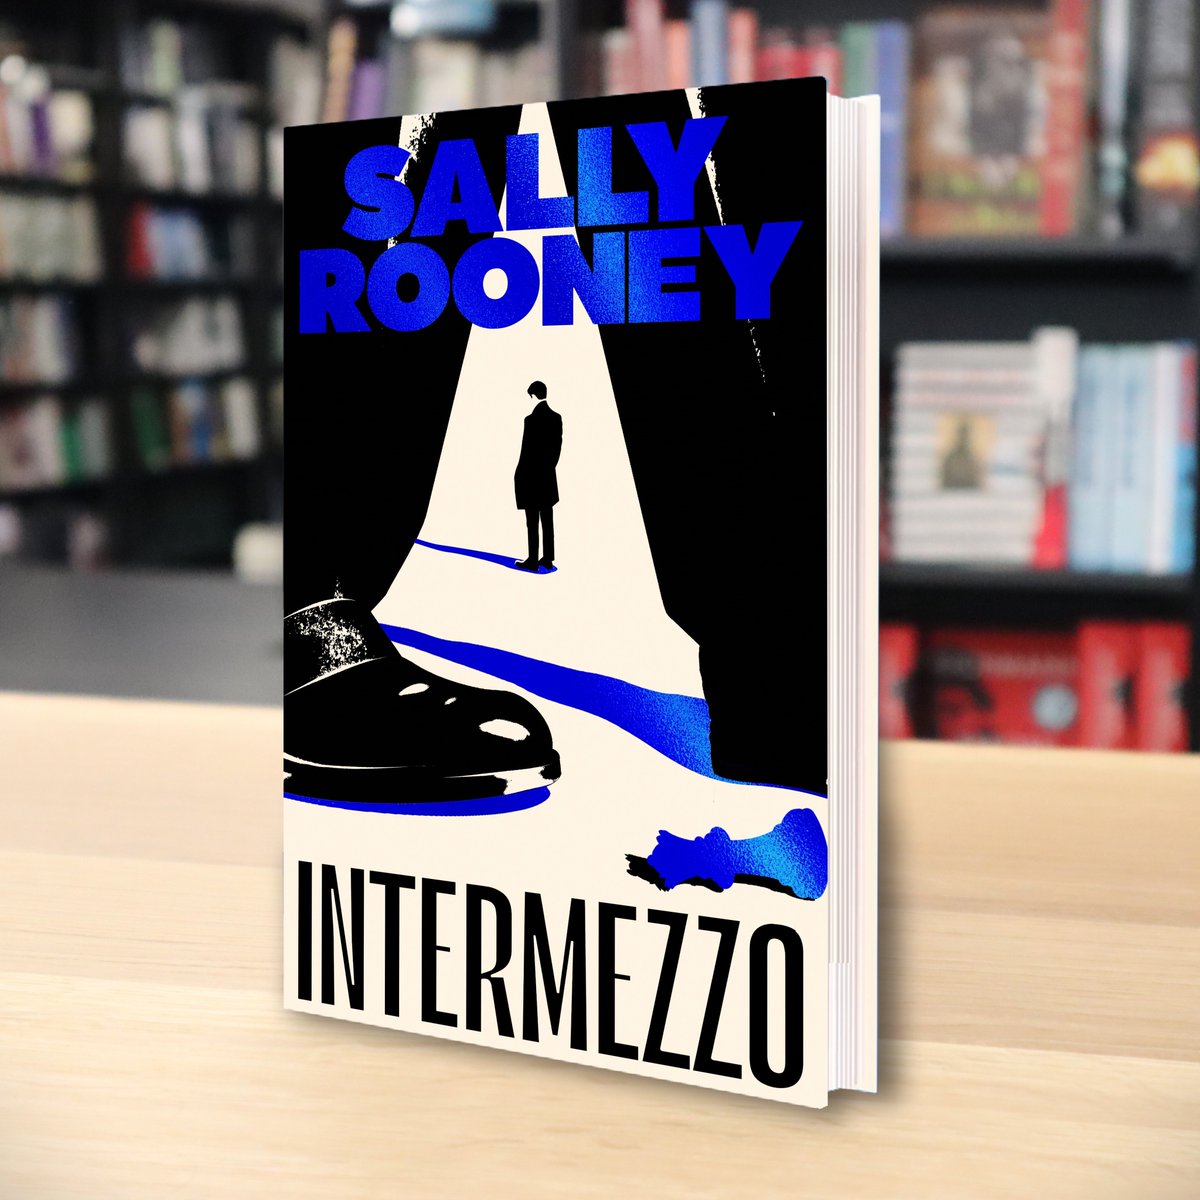 We are delighted to announce the Kennys Exclusive Signed Limited Edition of Sally Rooney's new novel, Intermezzo. It will be: -Signed by the Author -Exclusive cover printed & embossed with foil on board -Hardback -Limited to 1,000 copies -Out in September shorturl.at/jhAnK